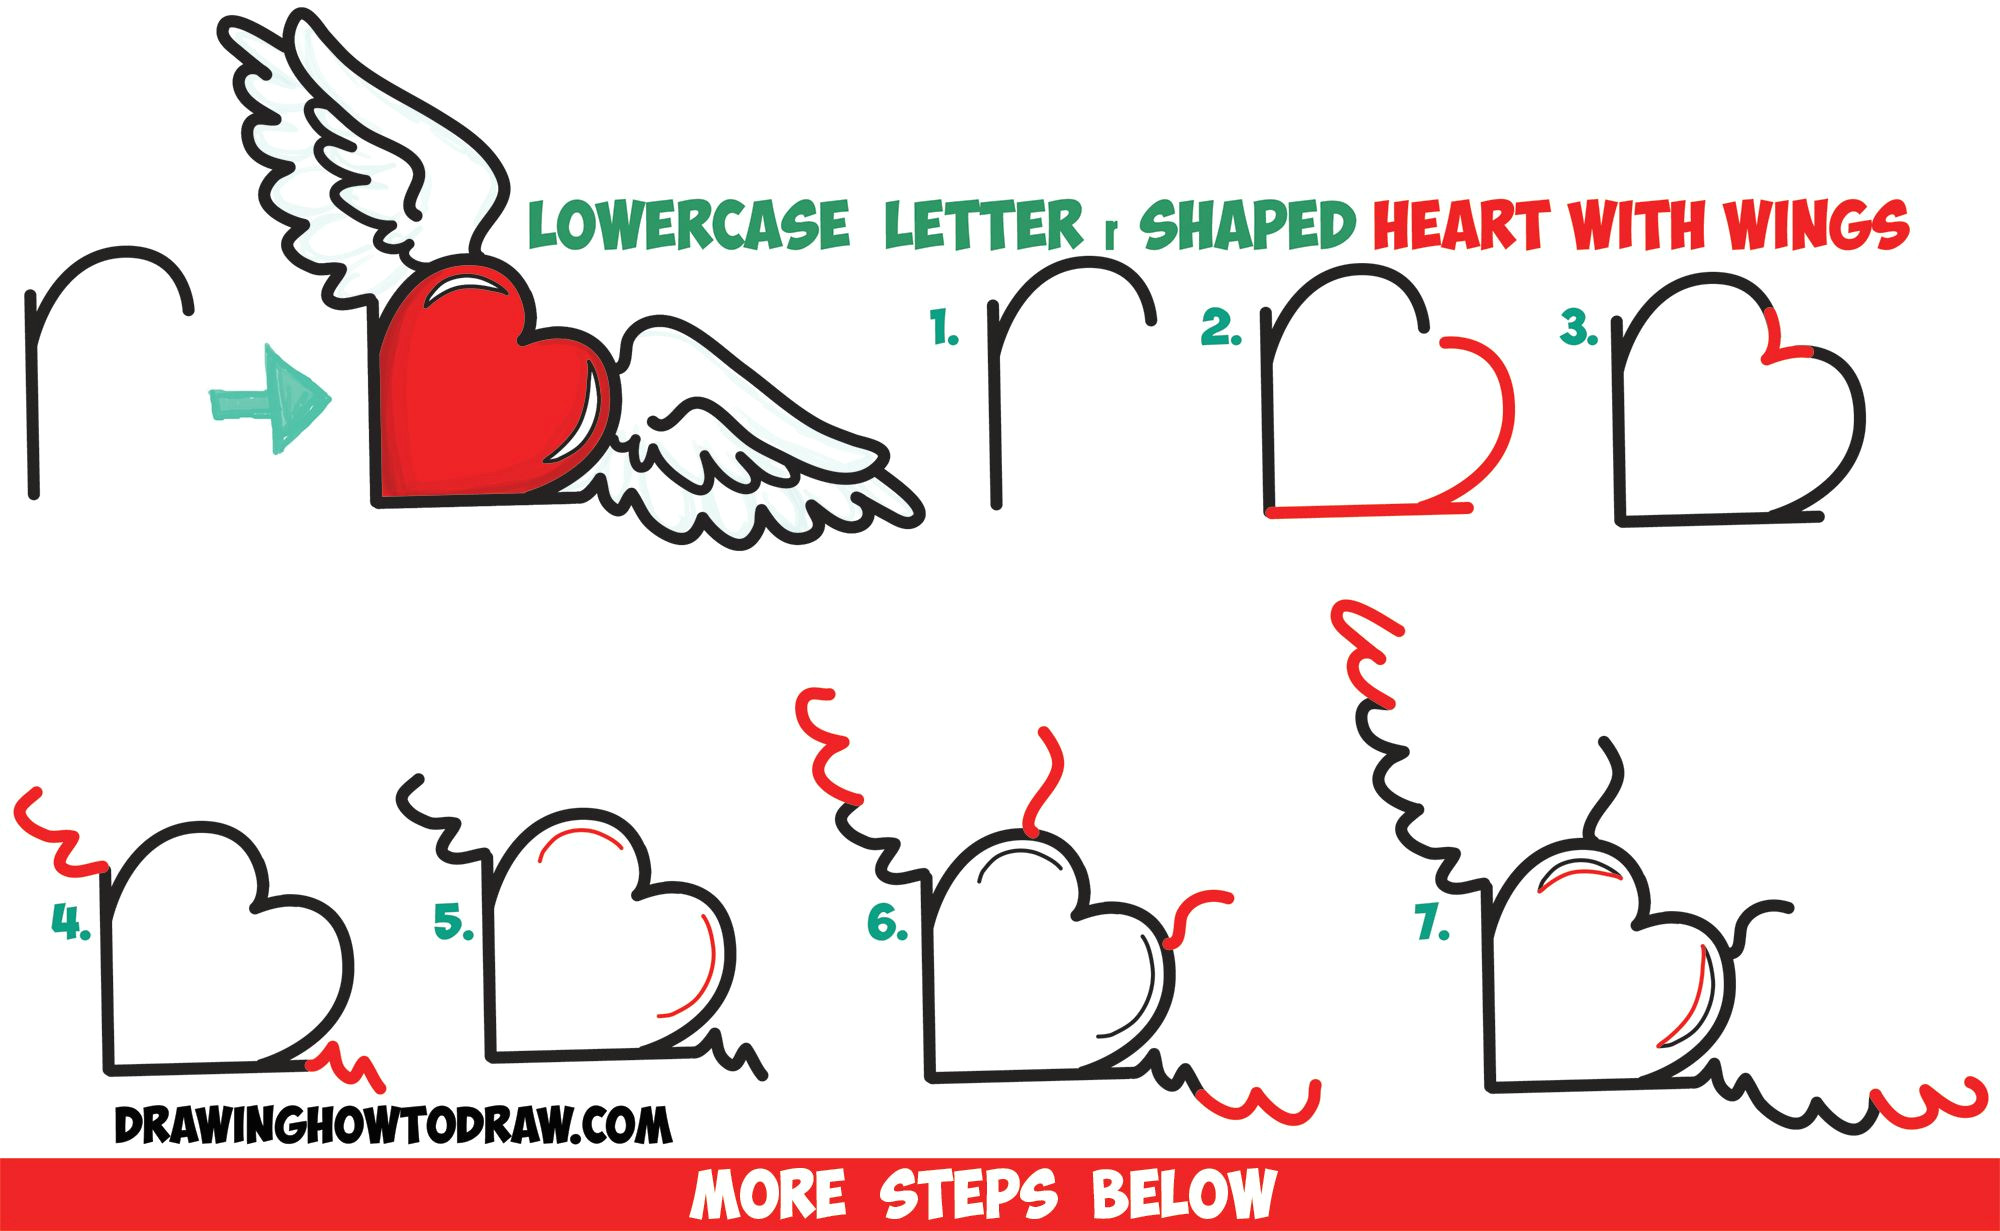 Easy Drawing Letters How to Draw Heart with Wings From Lowercase Letter R Shapes Easy